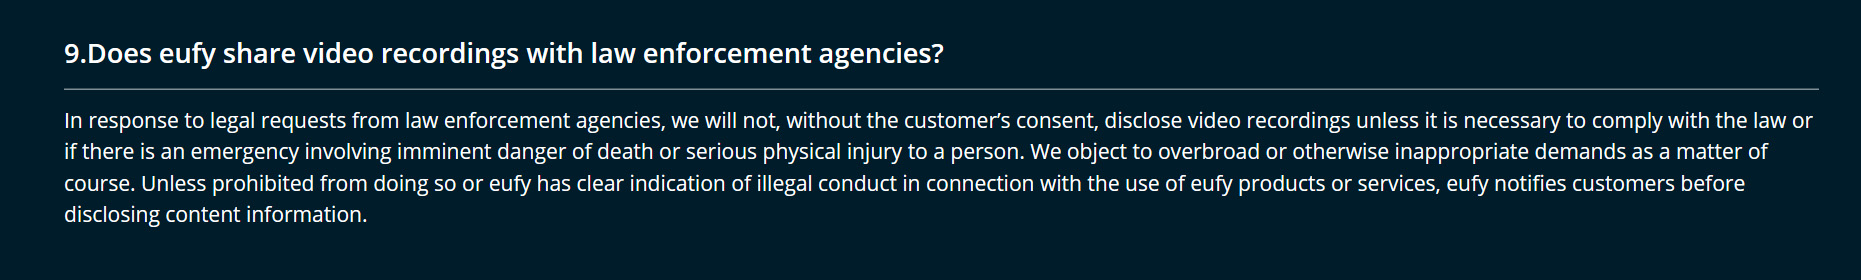 Removed Statement on Sharing Footage with Law Enforcement on Eufy's Privacy Policy Page